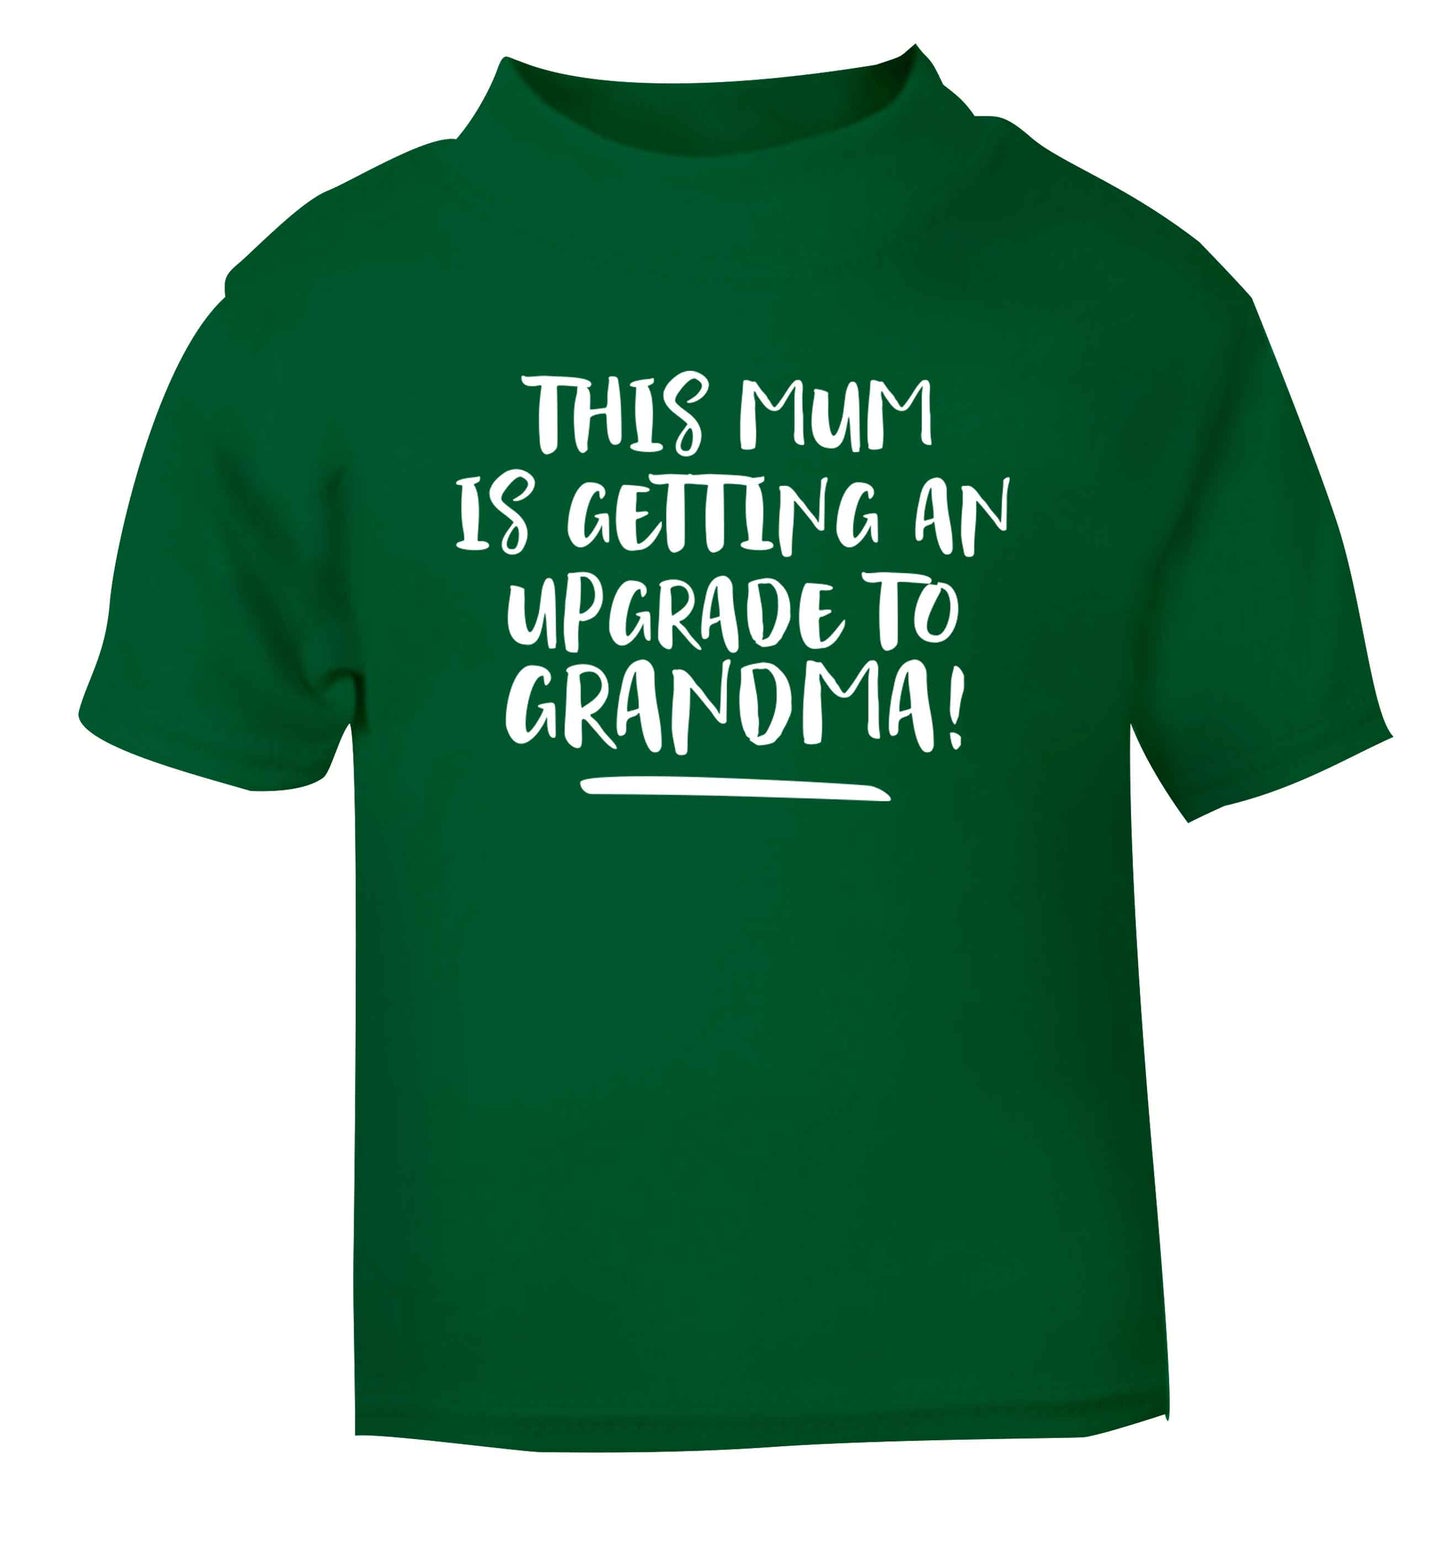 This mum is getting an upgrade to grandma! green Baby Toddler Tshirt 2 Years